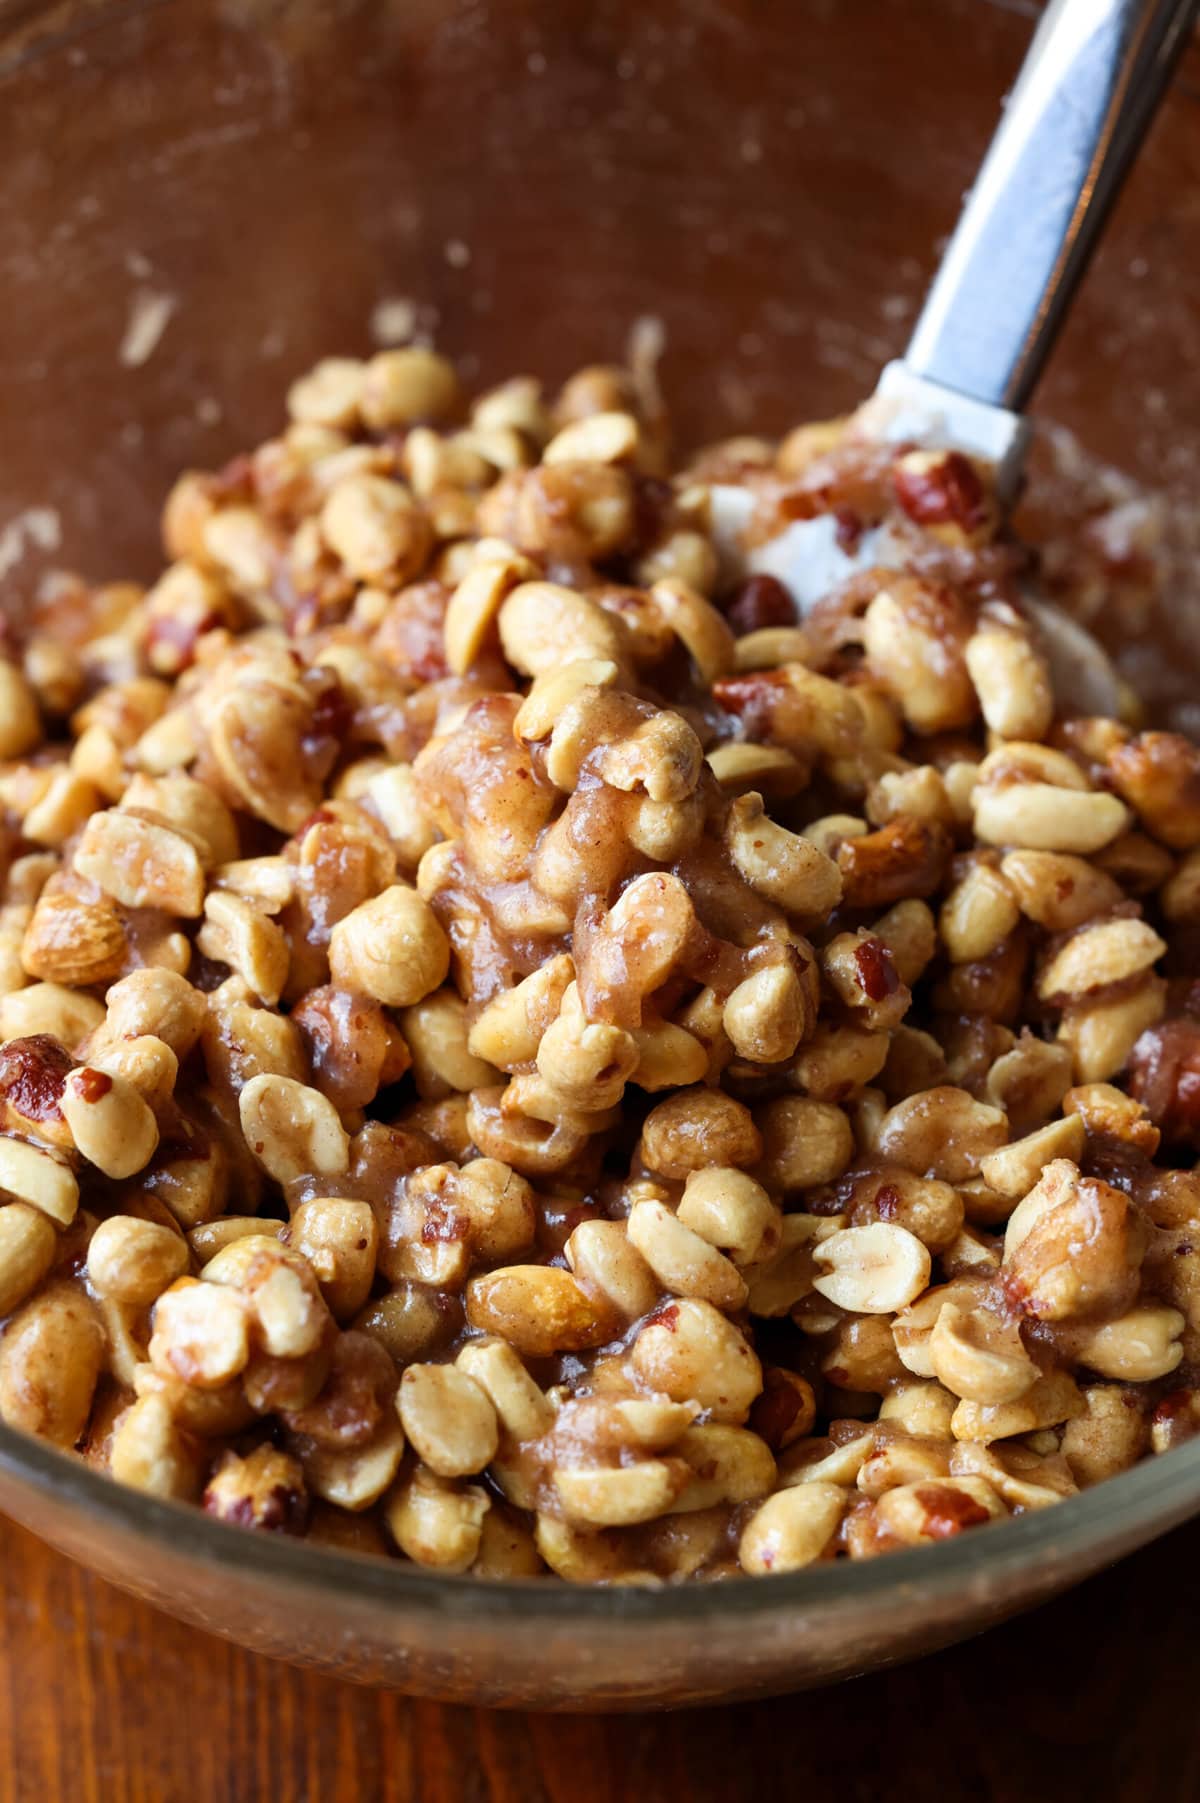 Mixing the peanuts in a bowl, coat them with butter, sugar mixture